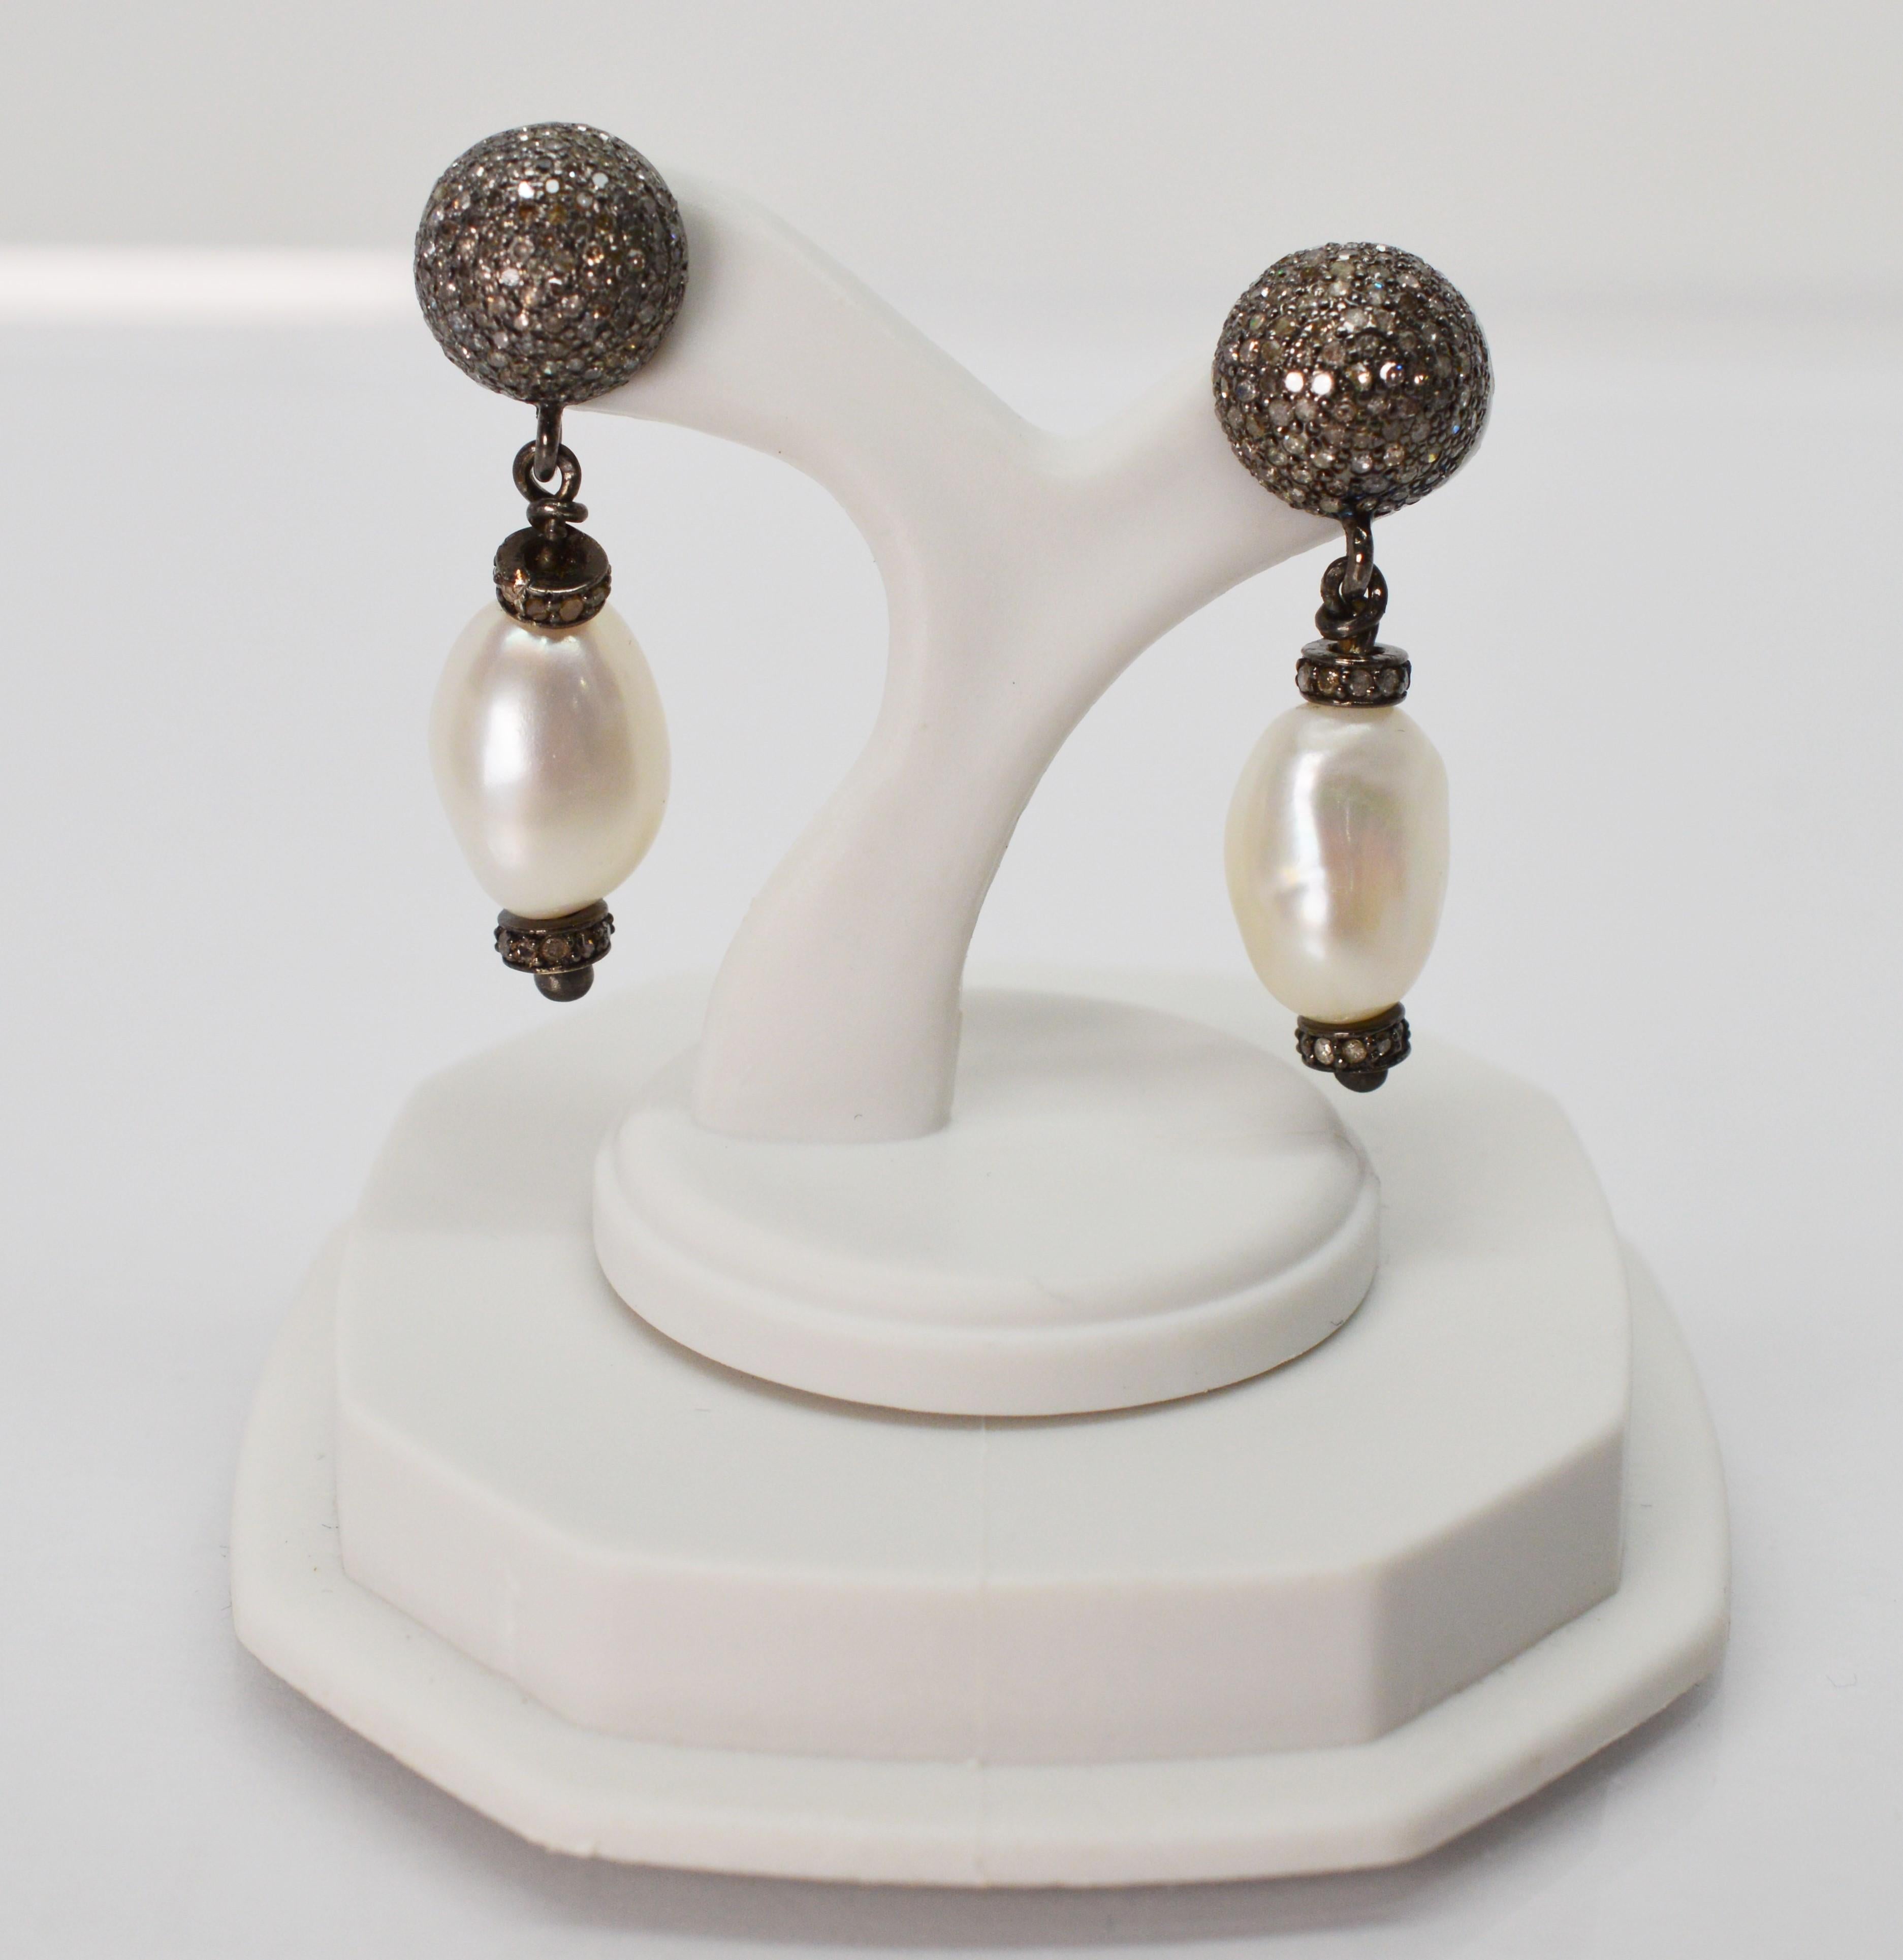 The natural beauty of baroque white Akoya pearls are displayed by these elegant drop earrings. Post style for pieced ears with a toned silver and diamond stud, the singular pearls measuring 7.25mm x 12.25mm dangle approximately one inch from the